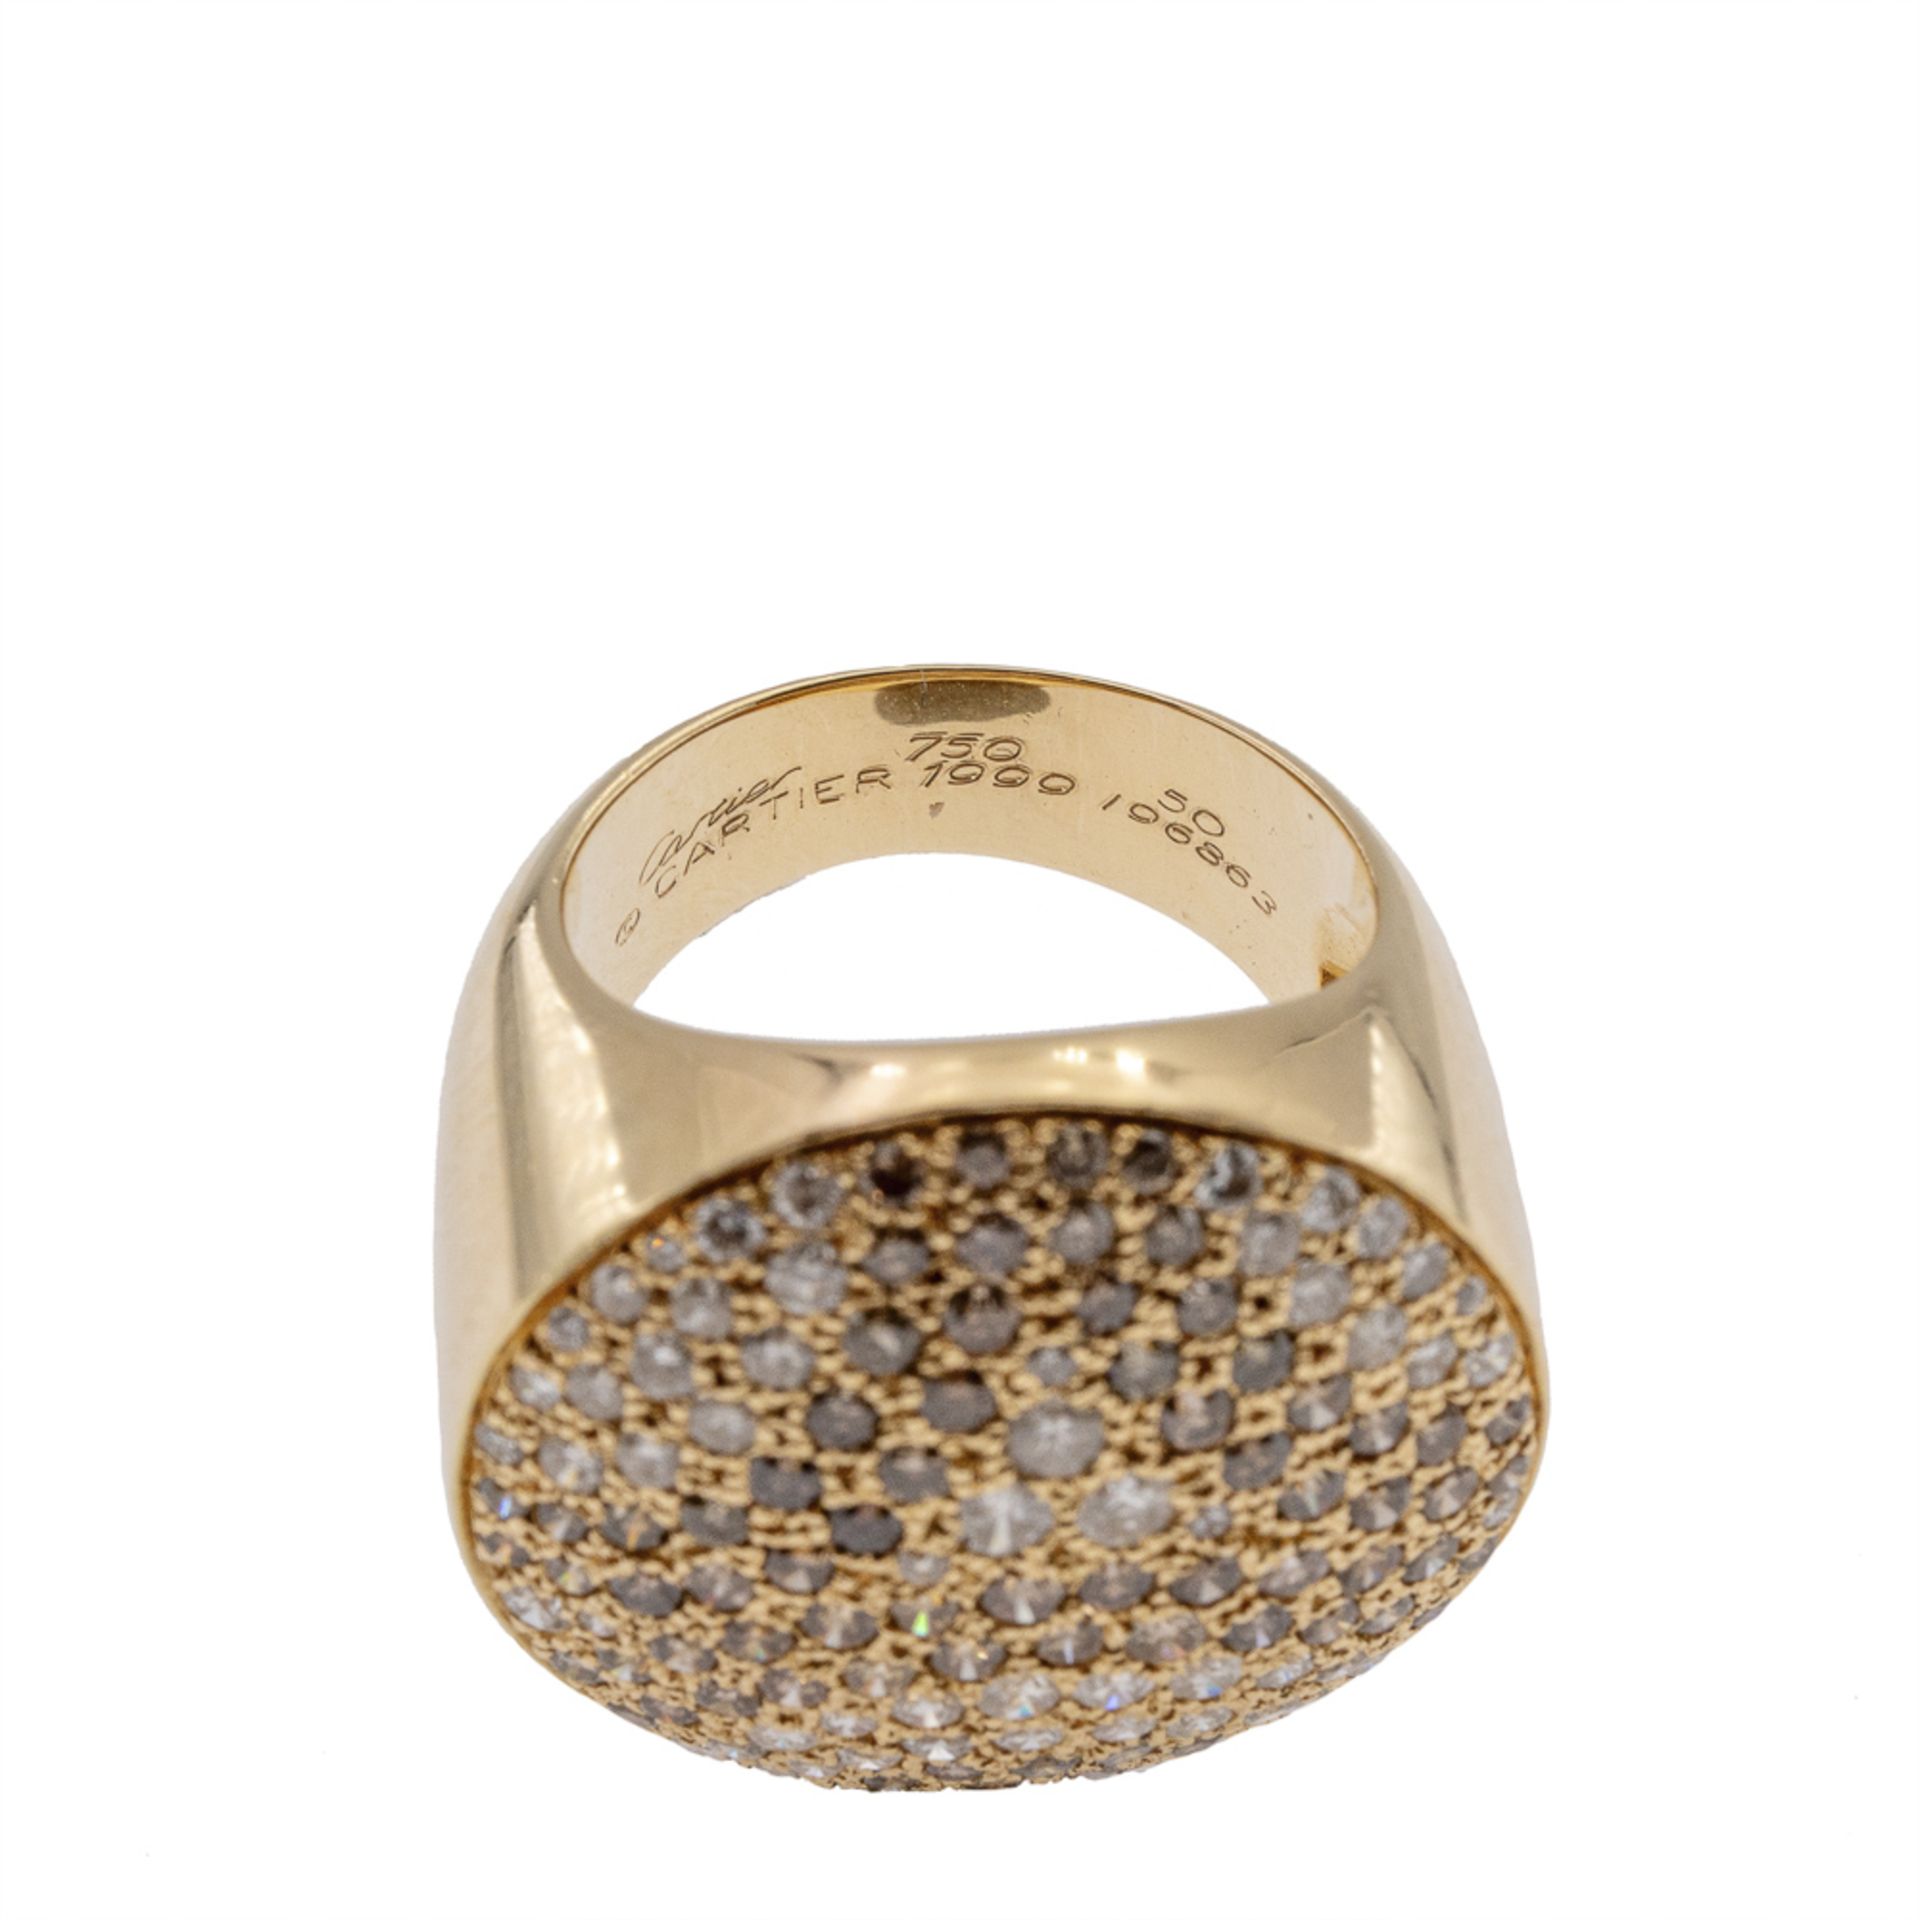 Cartier Jeton Savage collection ring - Image 4 of 4